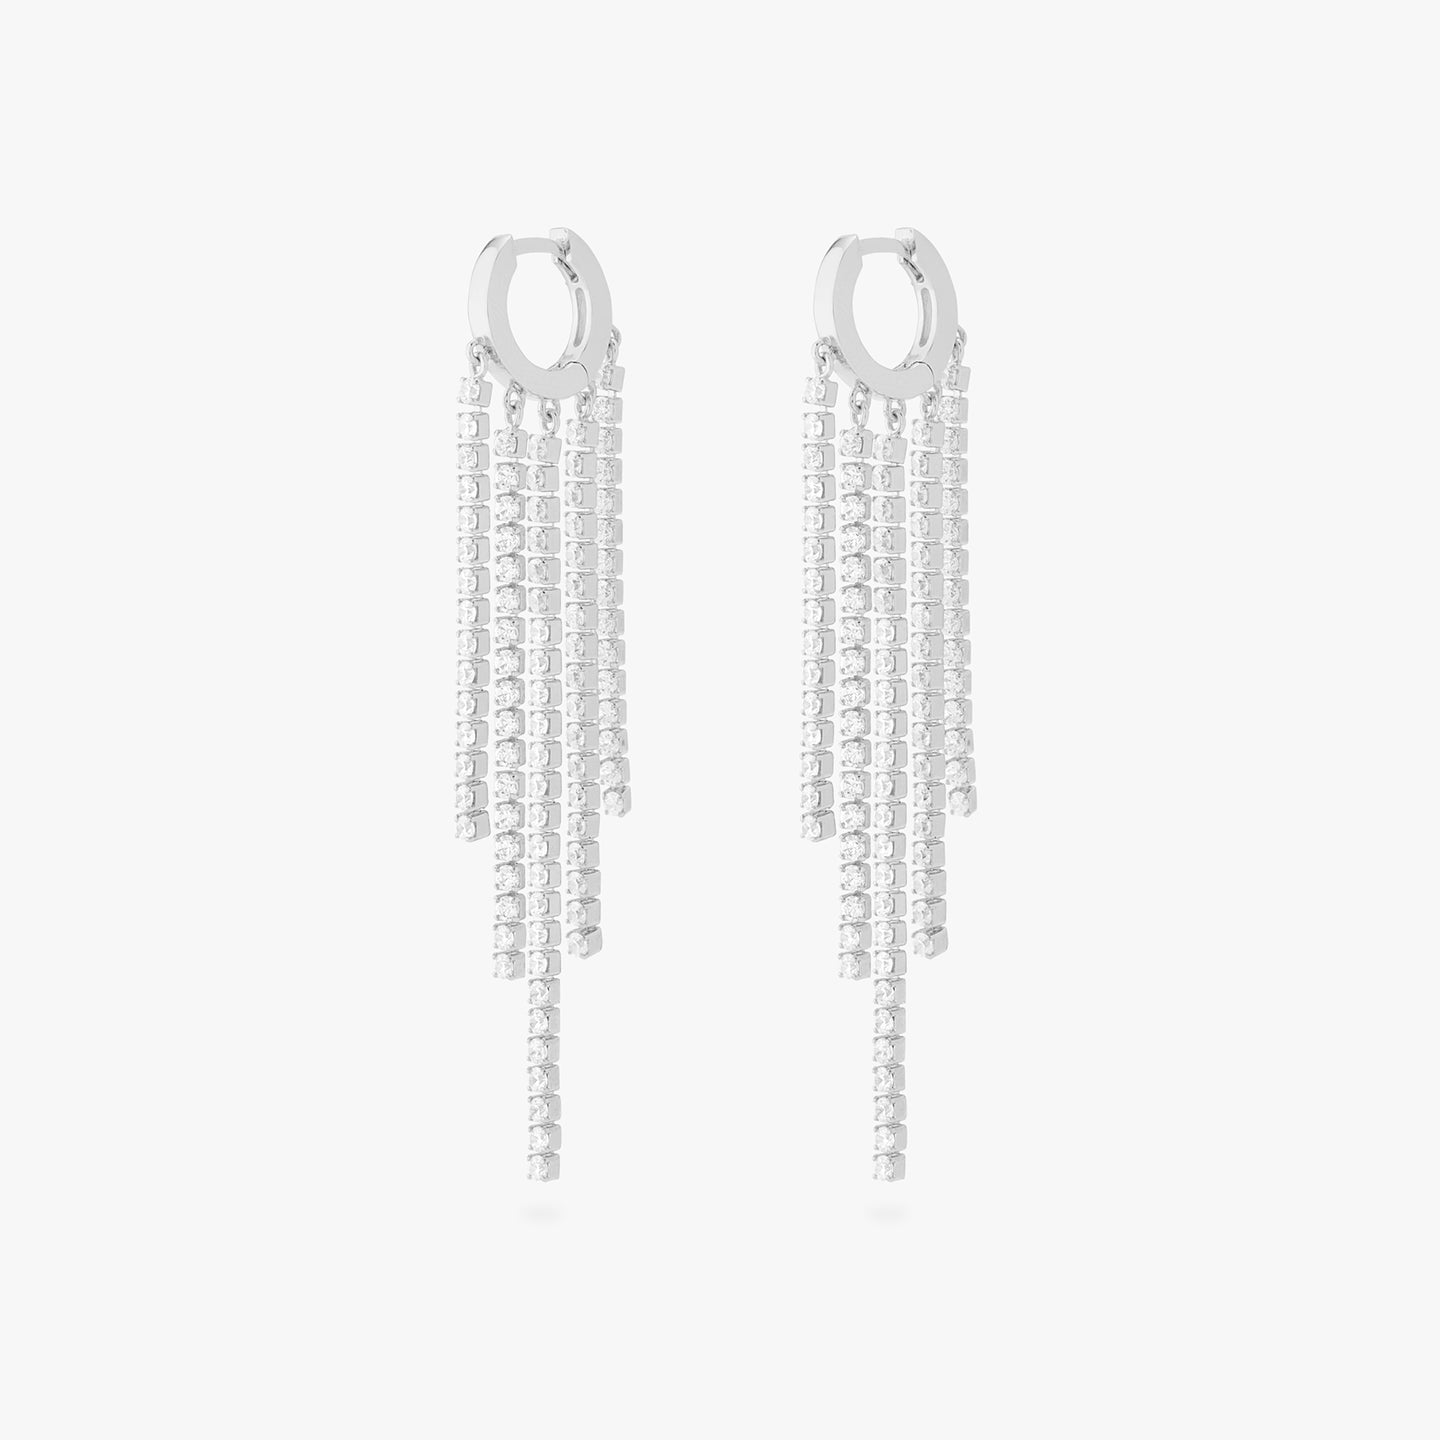 This is an image of a pair of silver huggies that have silver/clear CZ strands dangling from them in a fringed pattern. [pair] color:null|silver/clear